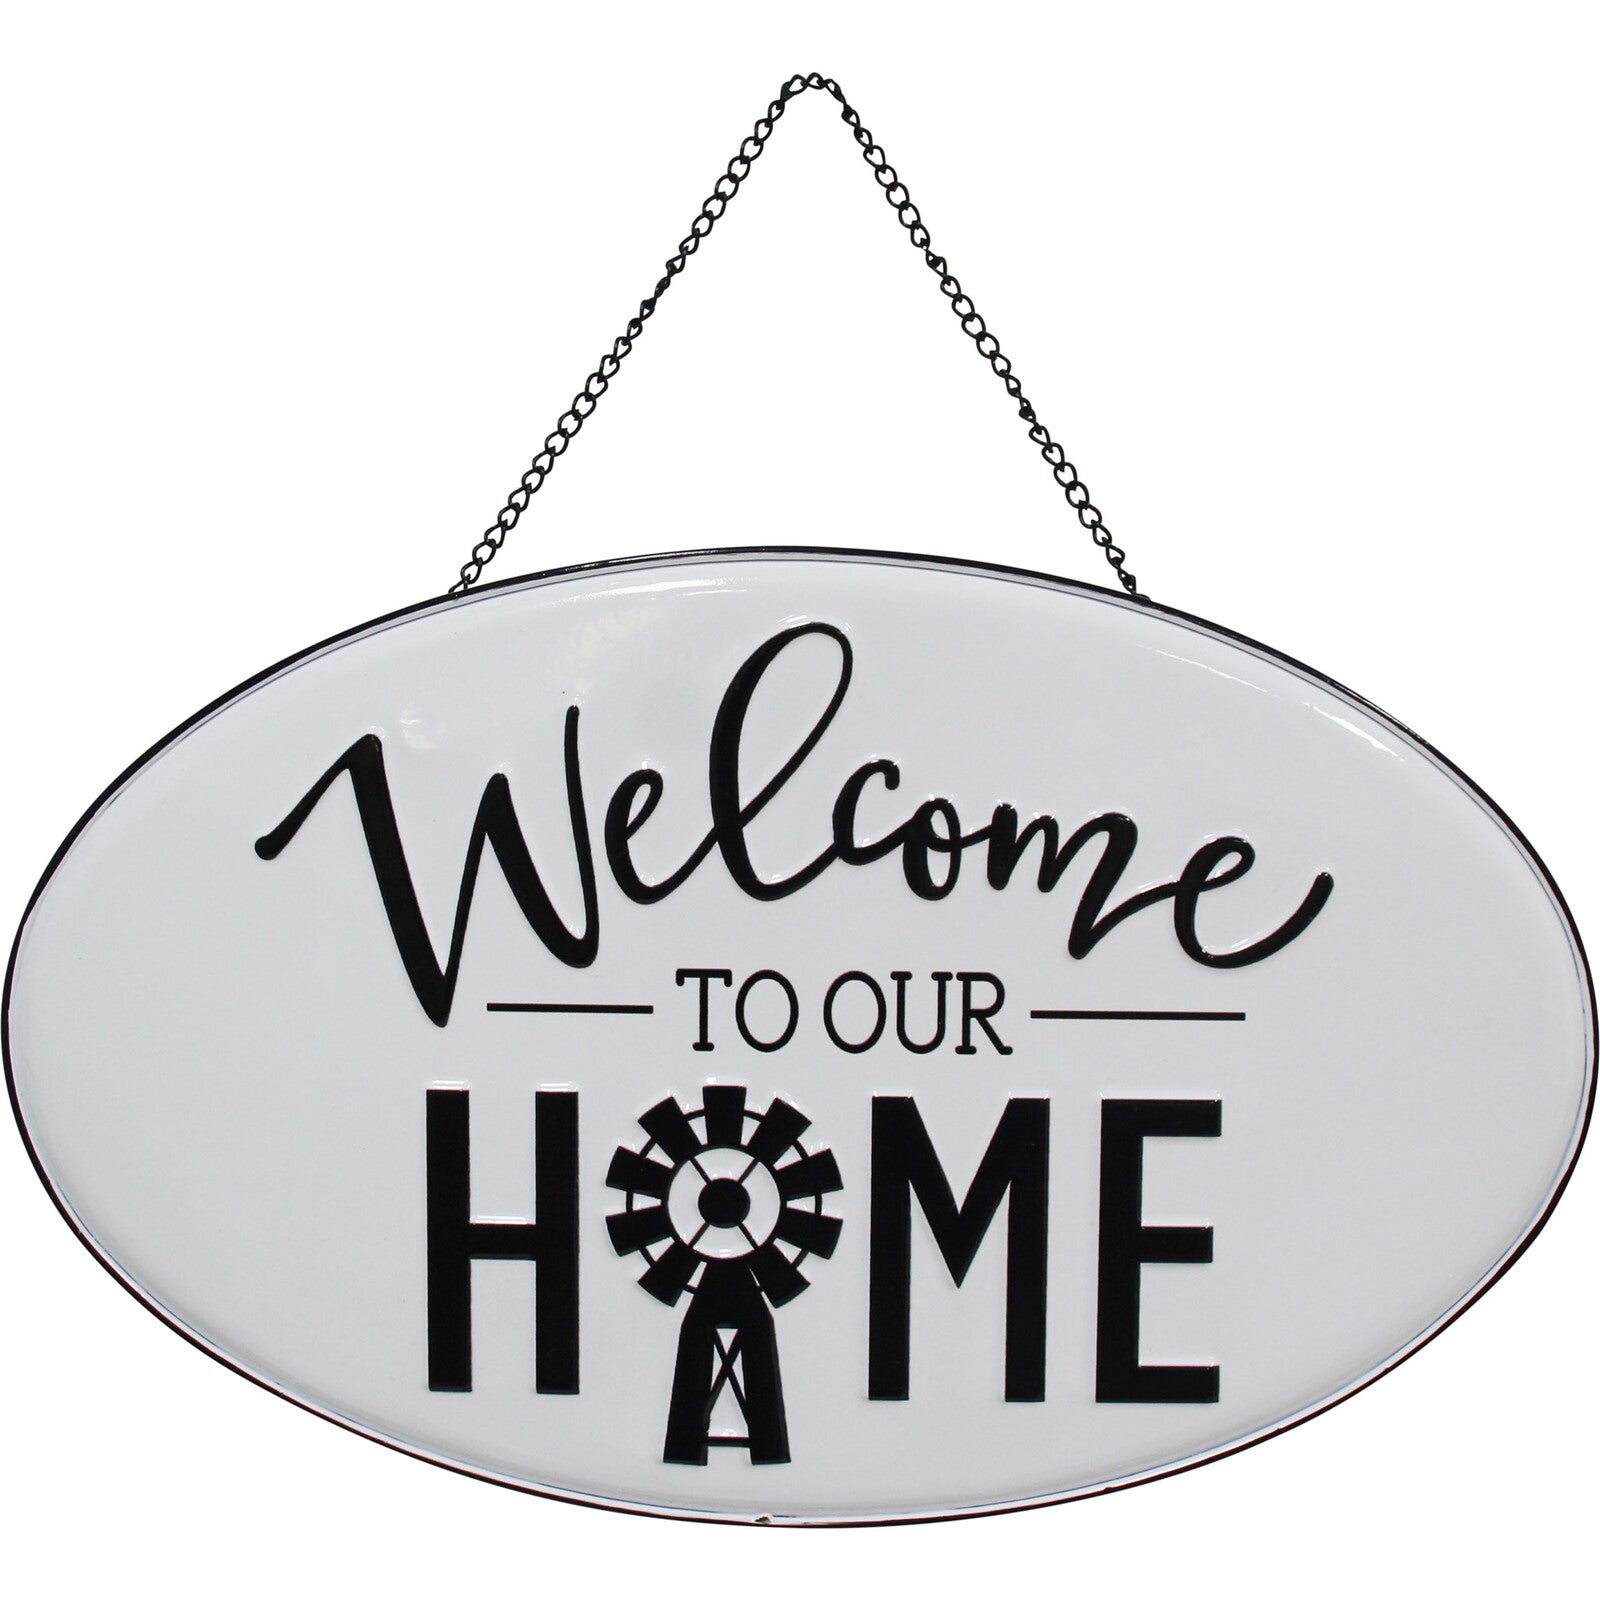 'Welcome To Our Home' Metal Sign